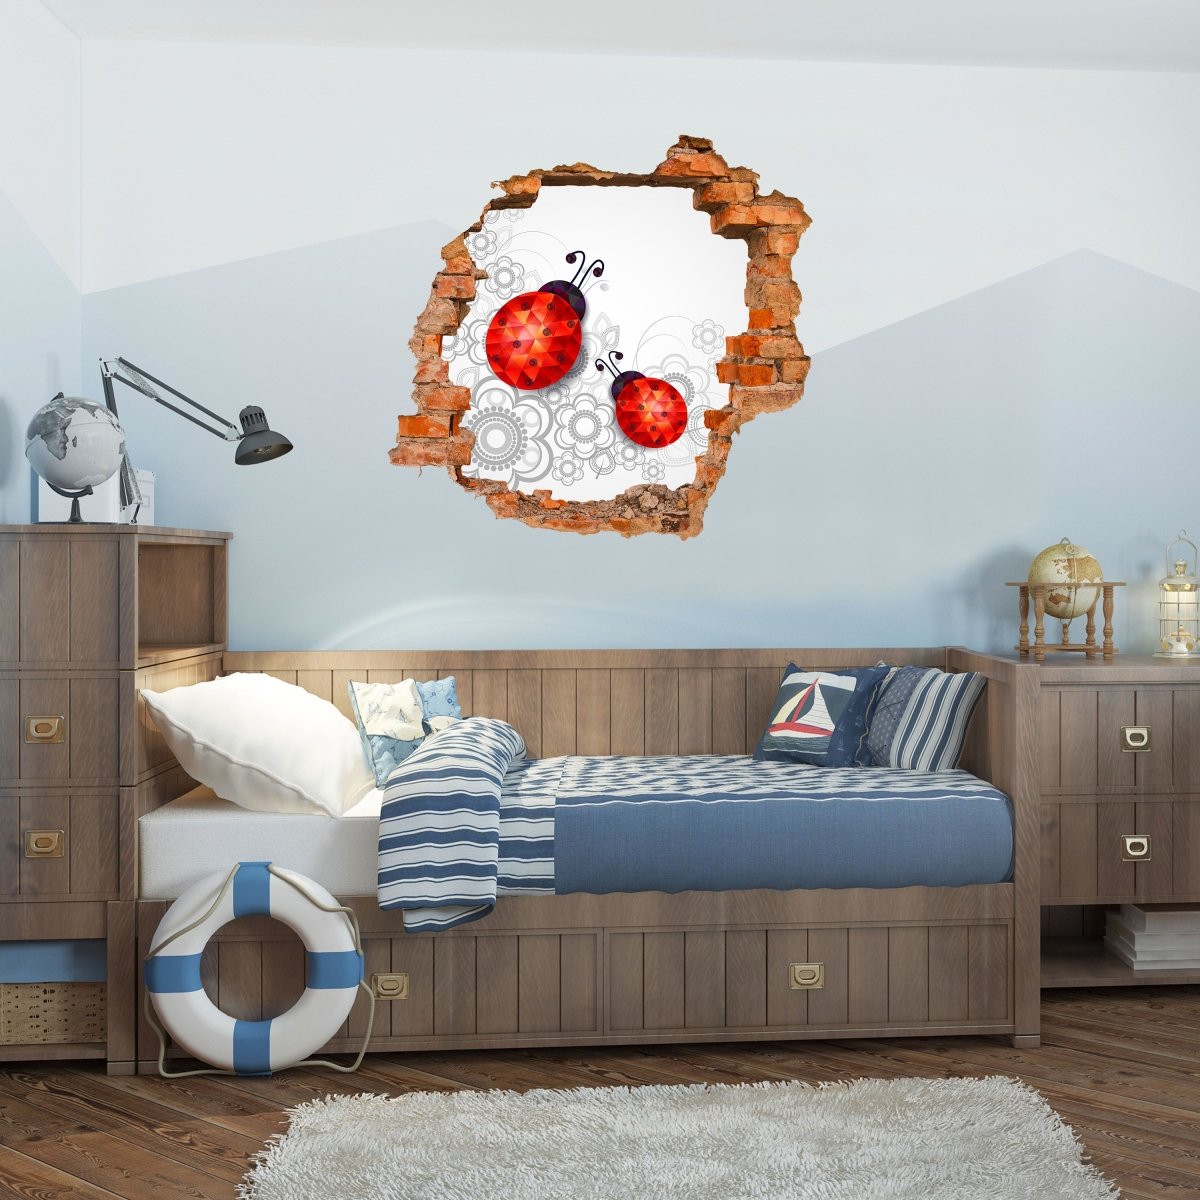 3D wall sticker ladybug patterns, ornaments, shapes - Wall Decal M1191